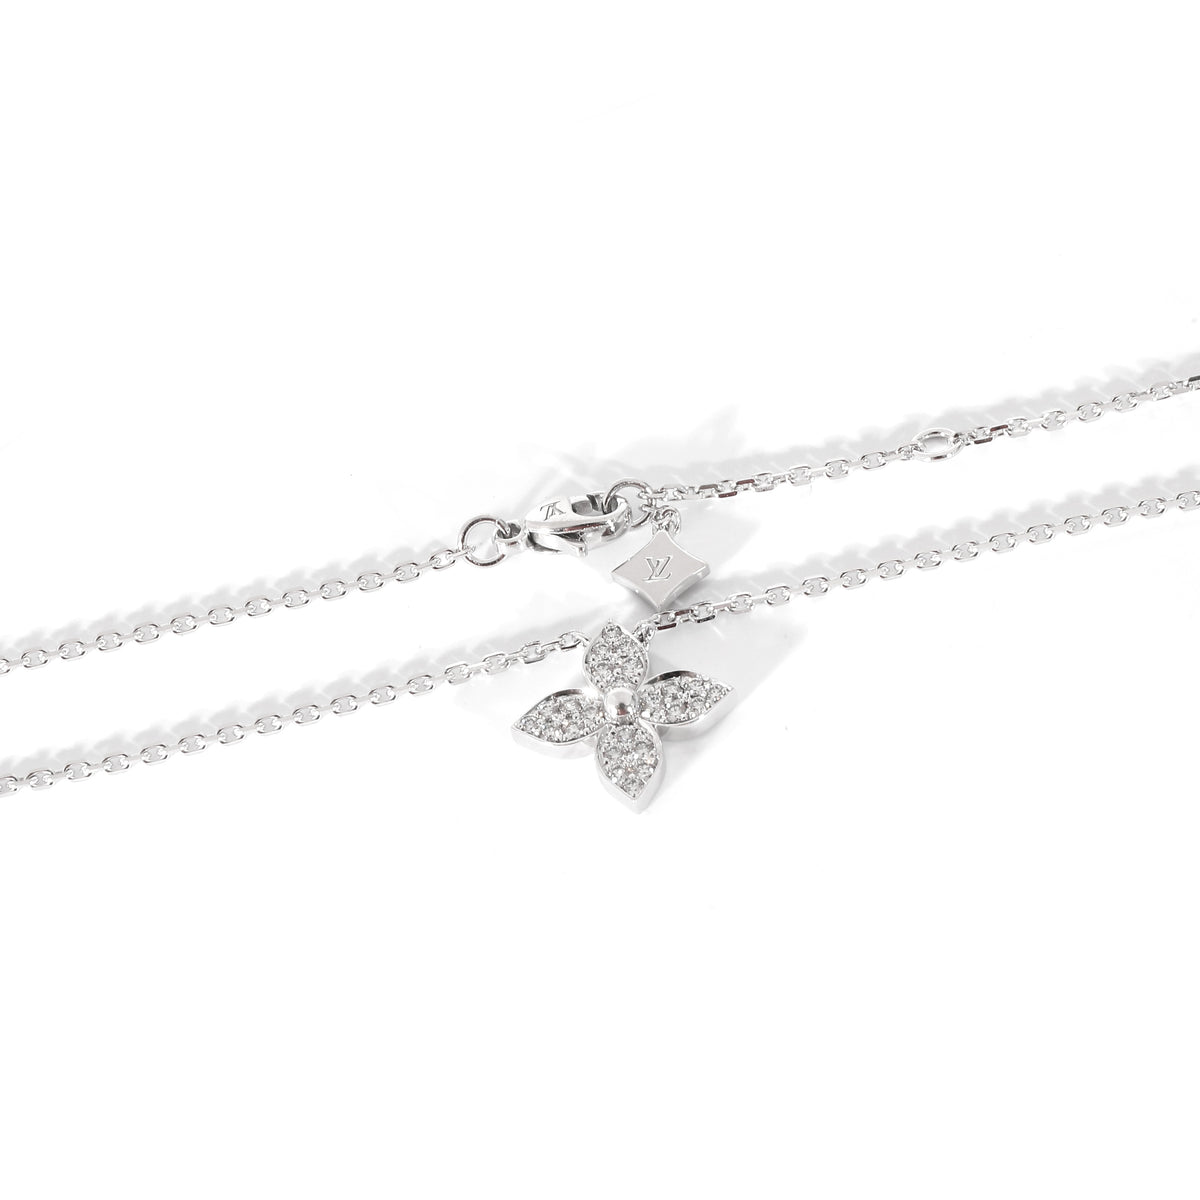 Idylle Blossom Necklace, White Gold, Diamonds - Categories